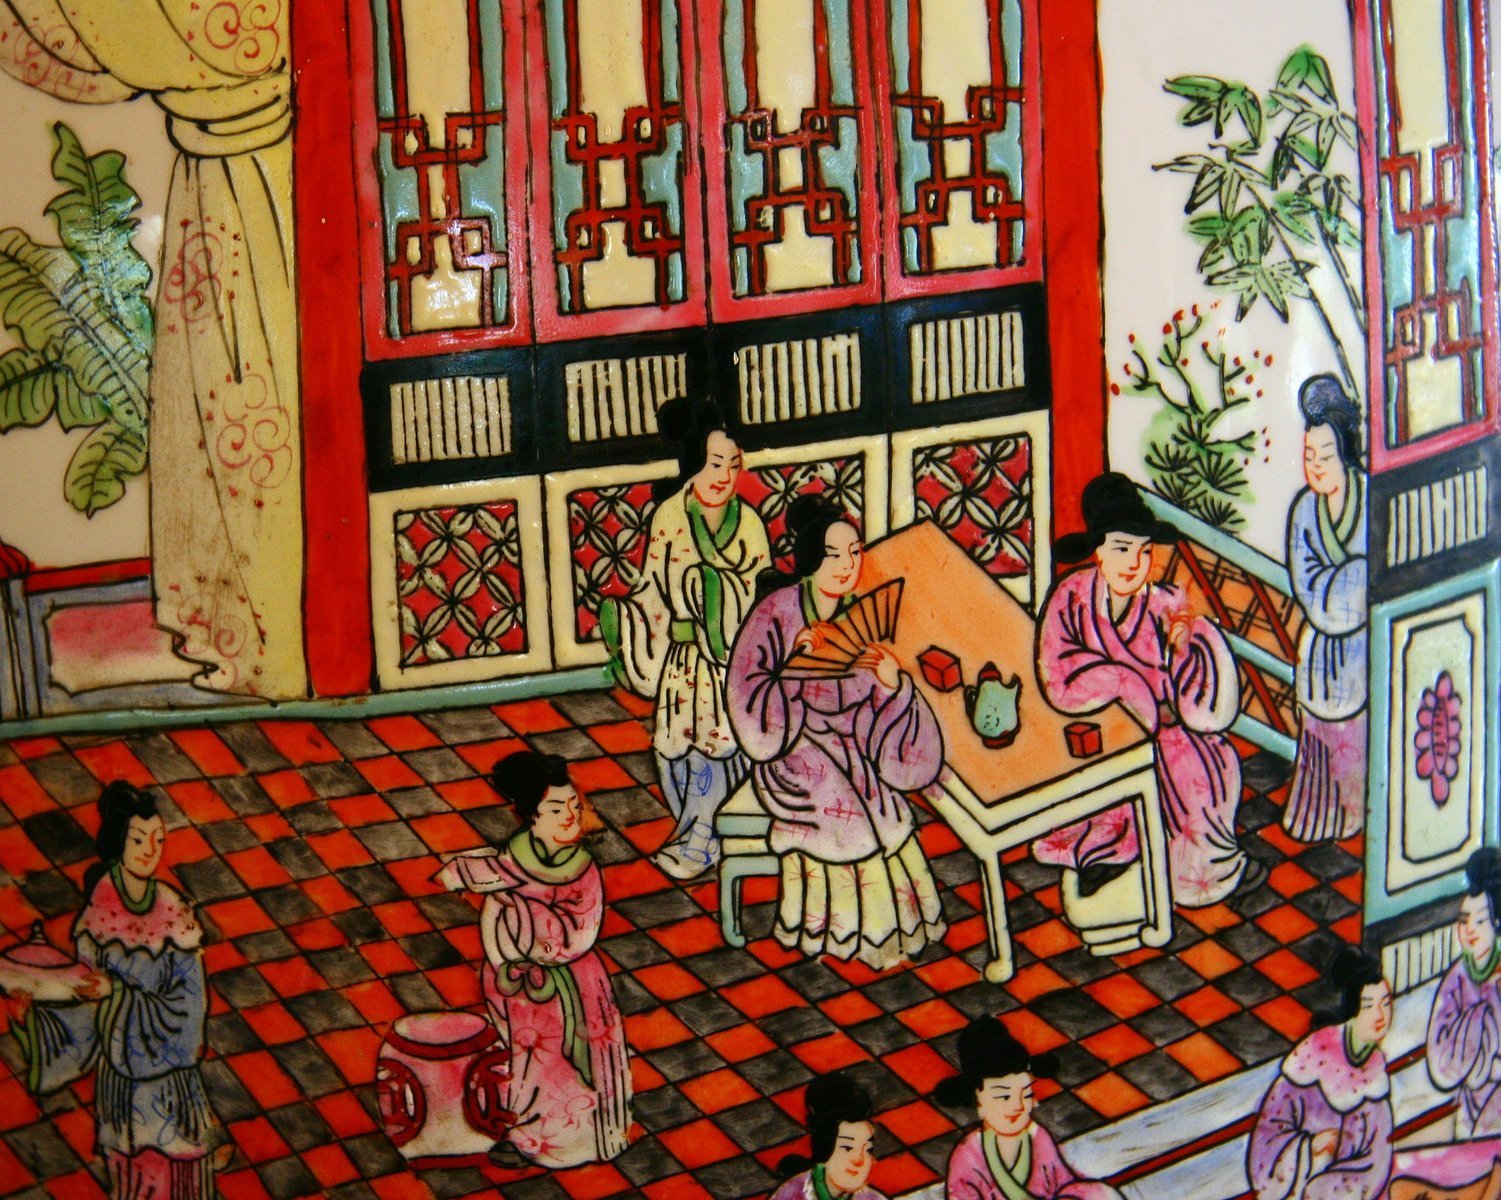 this painting depicts women playing cards together